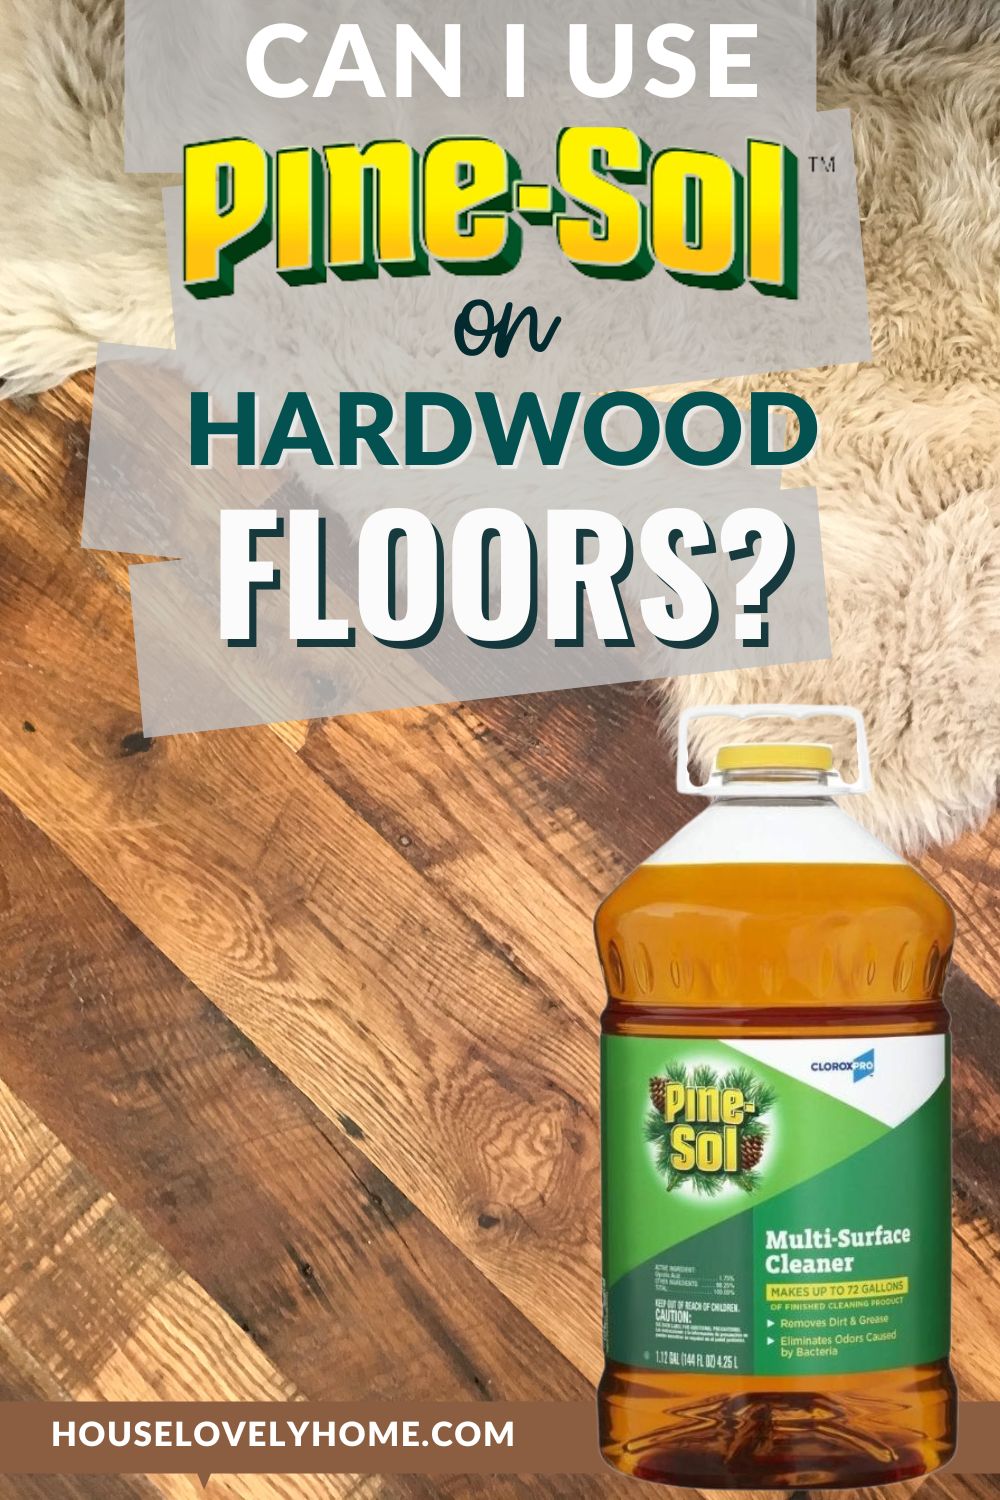 Image showing a bottle of Pine-sol on wooden floor with rug and text overlays that read Can You Use Pine-Sol on Hardwood Floors